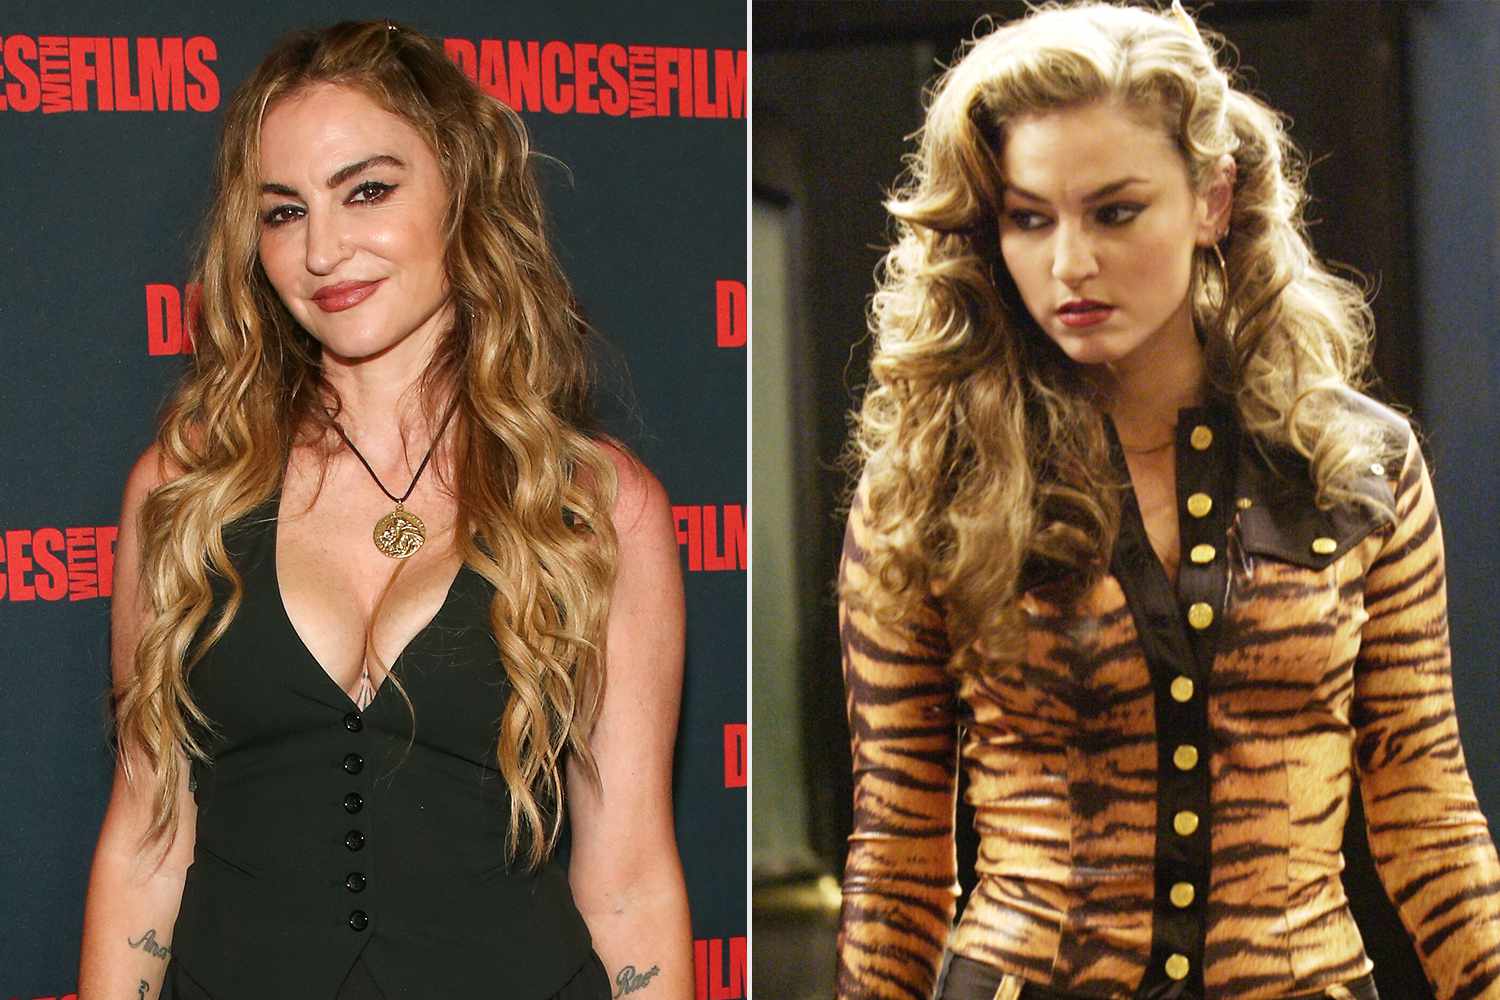 Drea de Matteo Reveals She Doesn't Shave Her Armpits (But Had to on Set of The Sopranos)